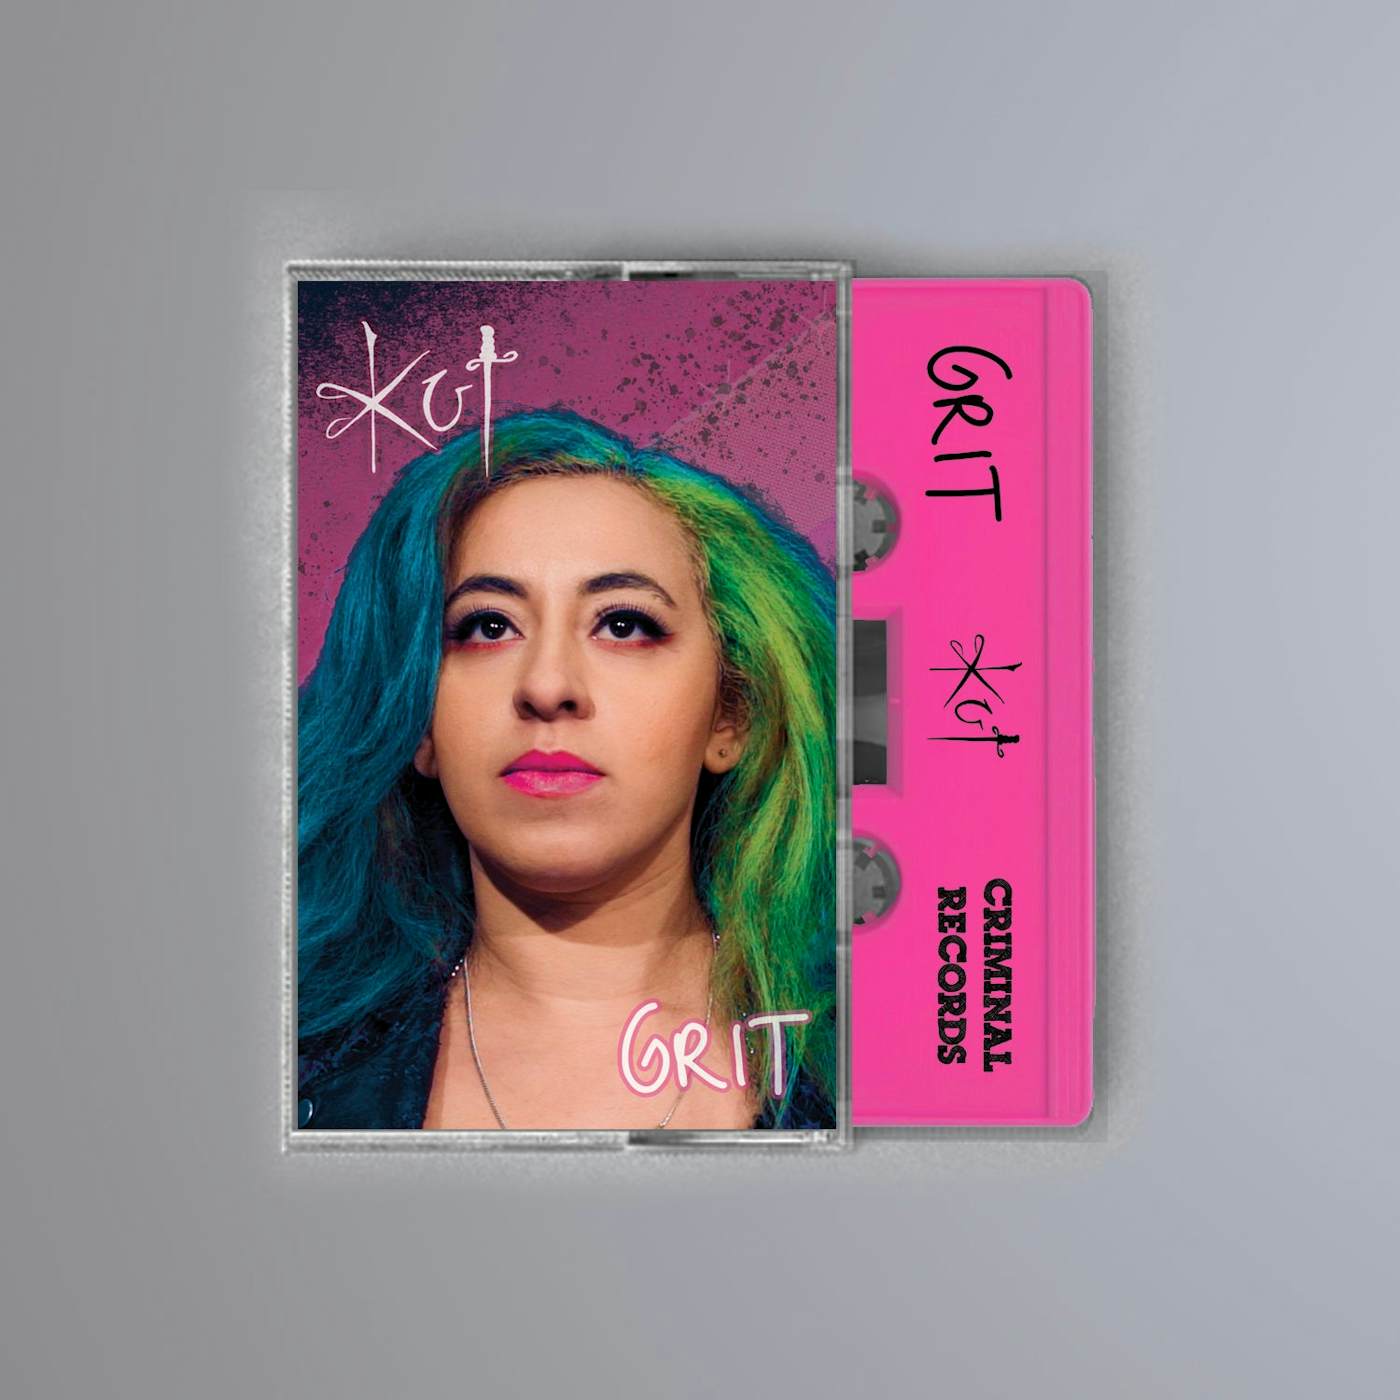 The Kut - 'GRIT' Pink Bundle (All Physical Formats)